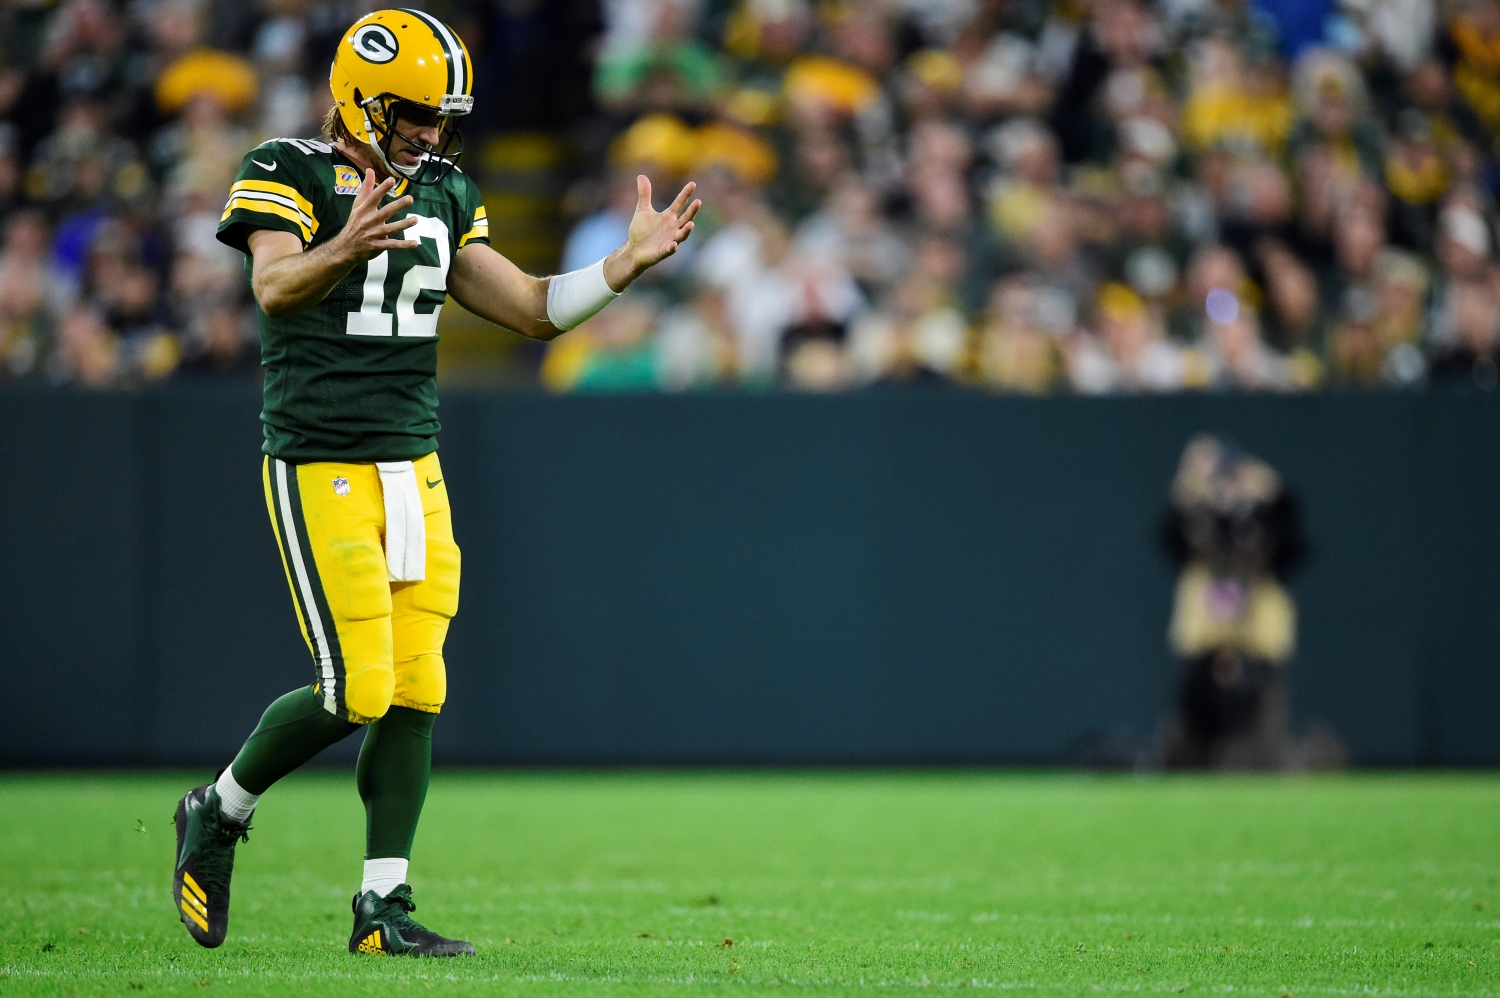 Green Bay Packers quarterback Aaron Rodgers reacts after an incomplete pass against the Pittsburgh Steelers.